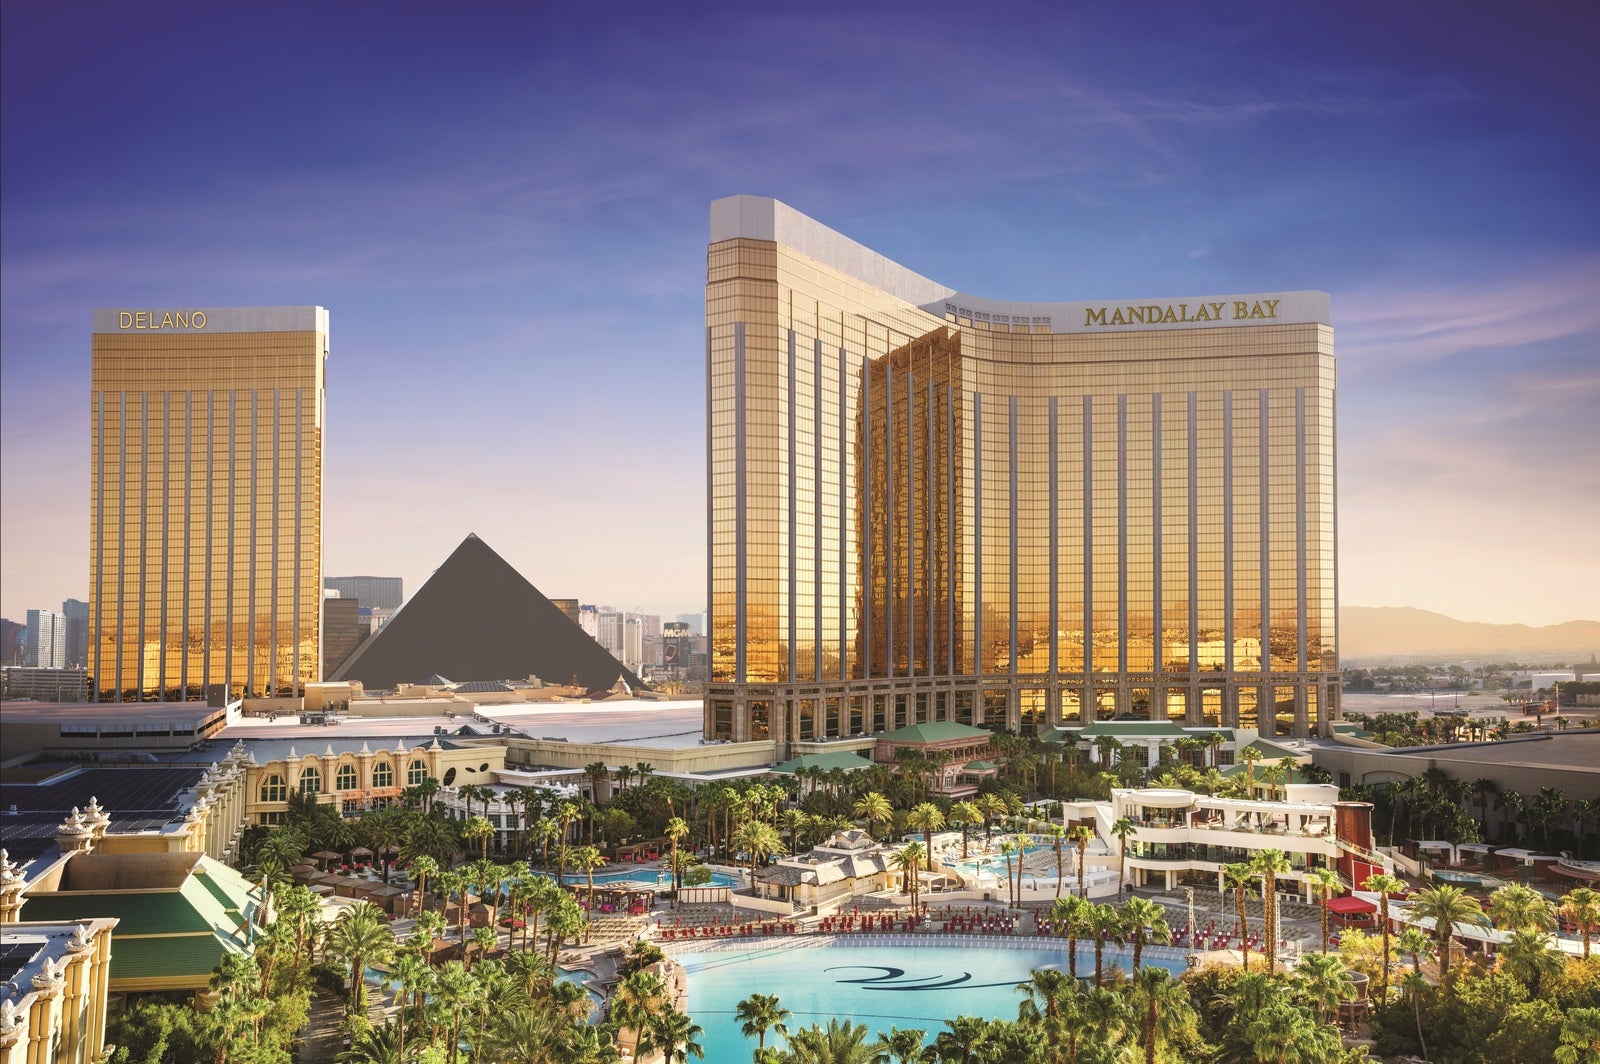 Mandalay Bay in Las Vegas - Experience One of Nevada's Most Iconic